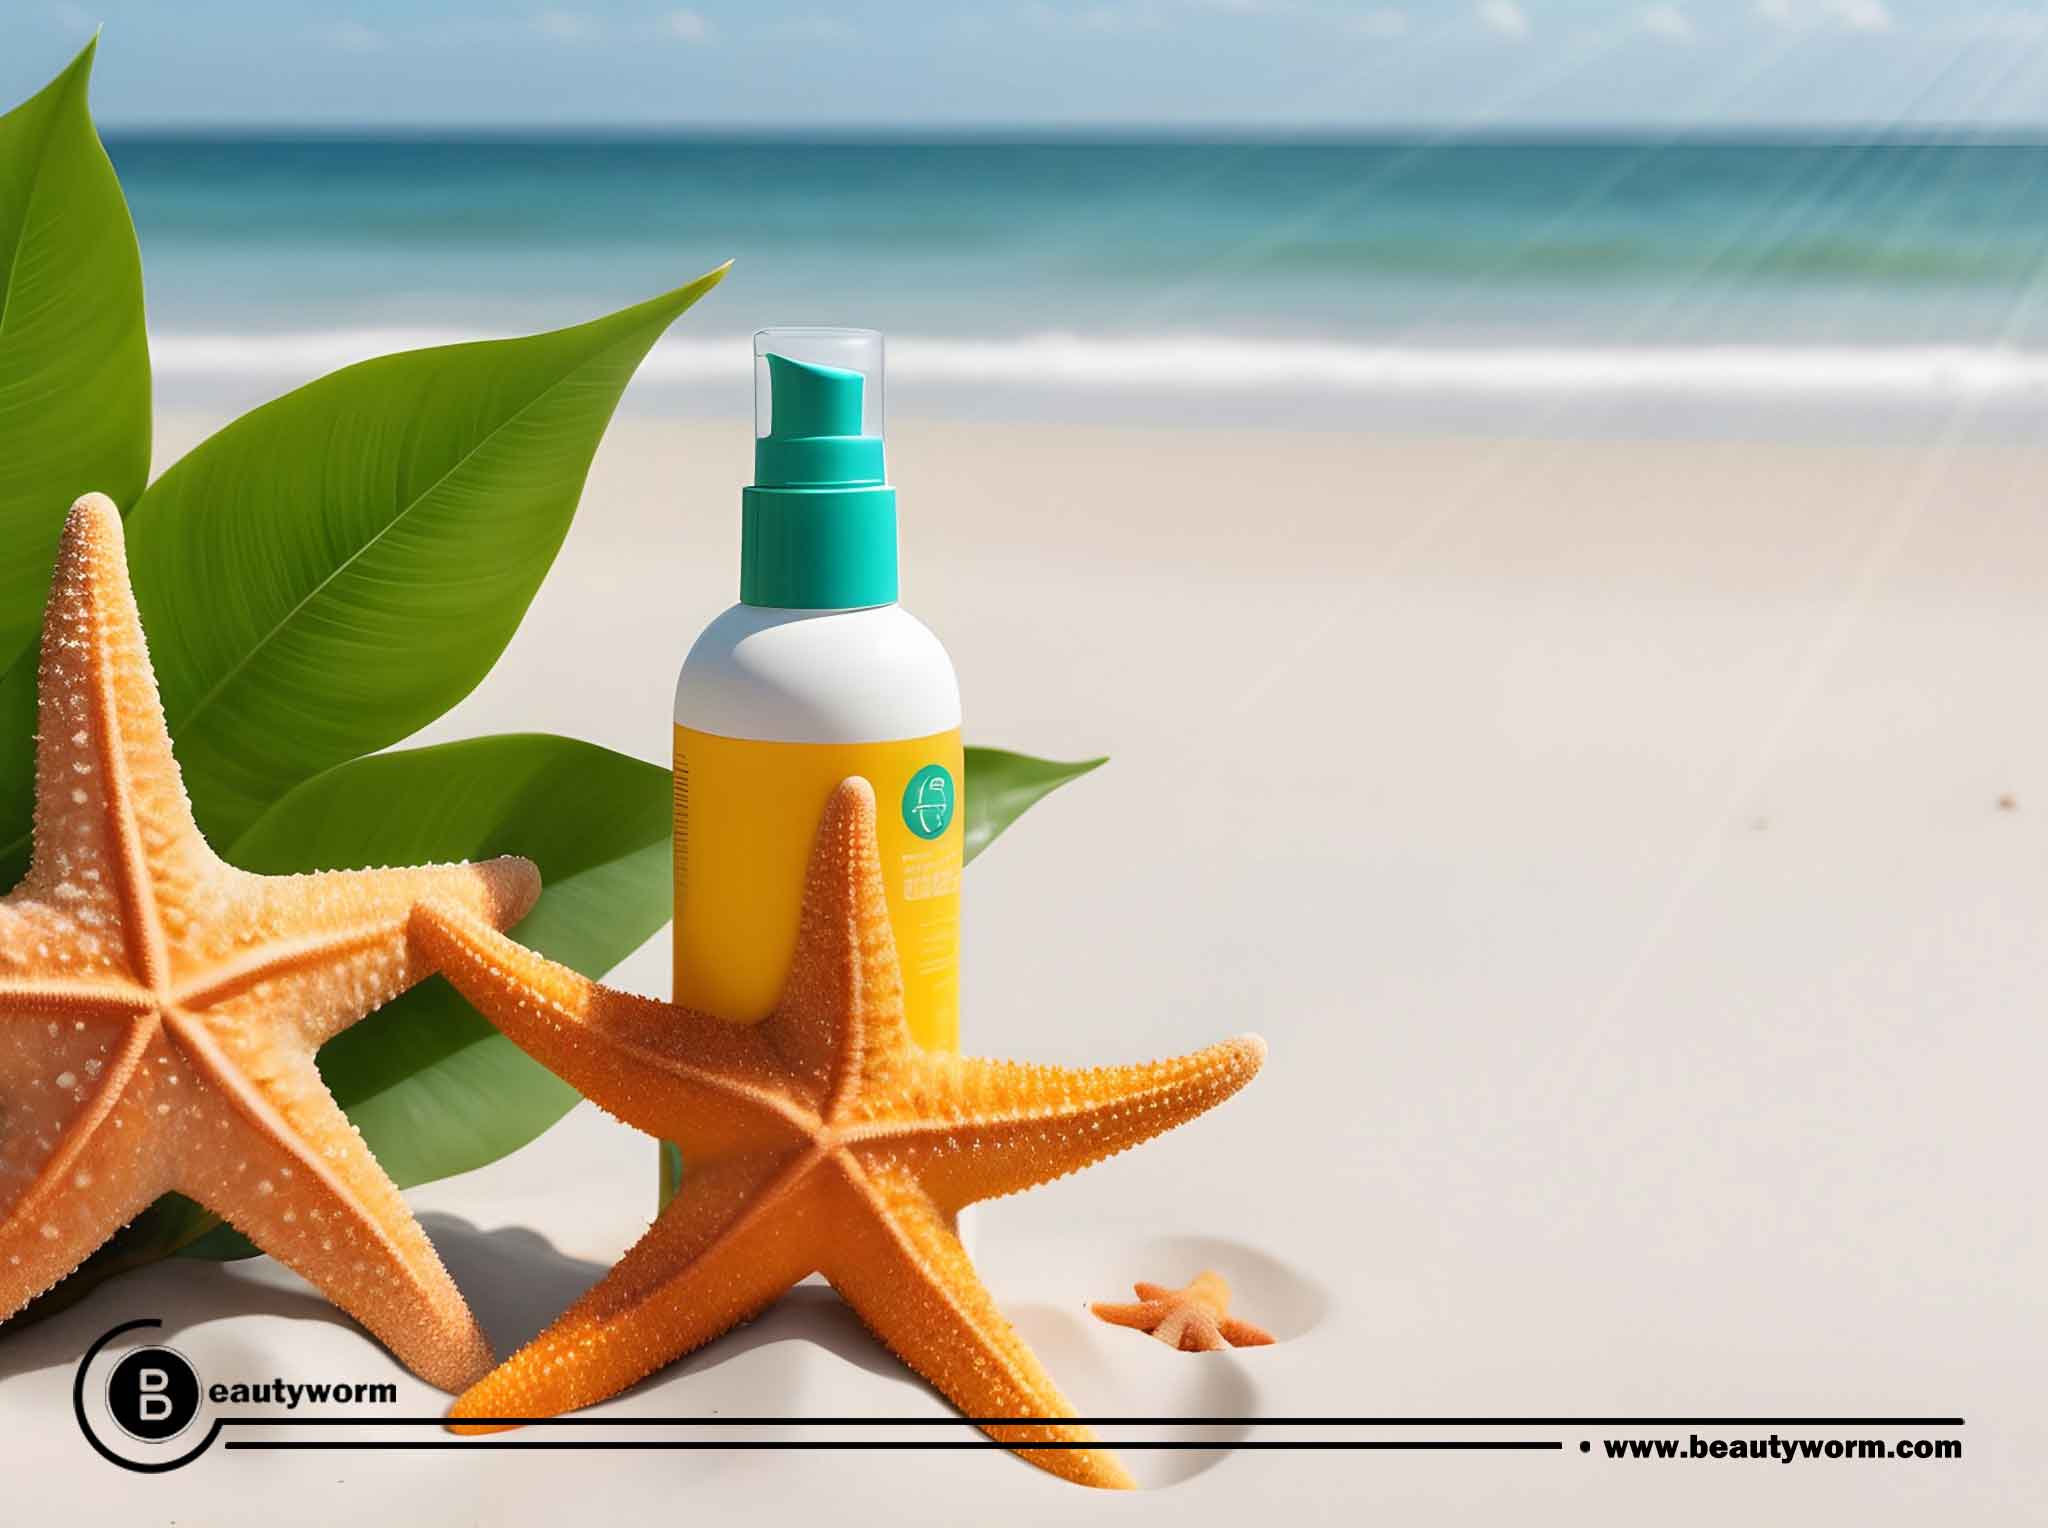 How long does sunscreen last?